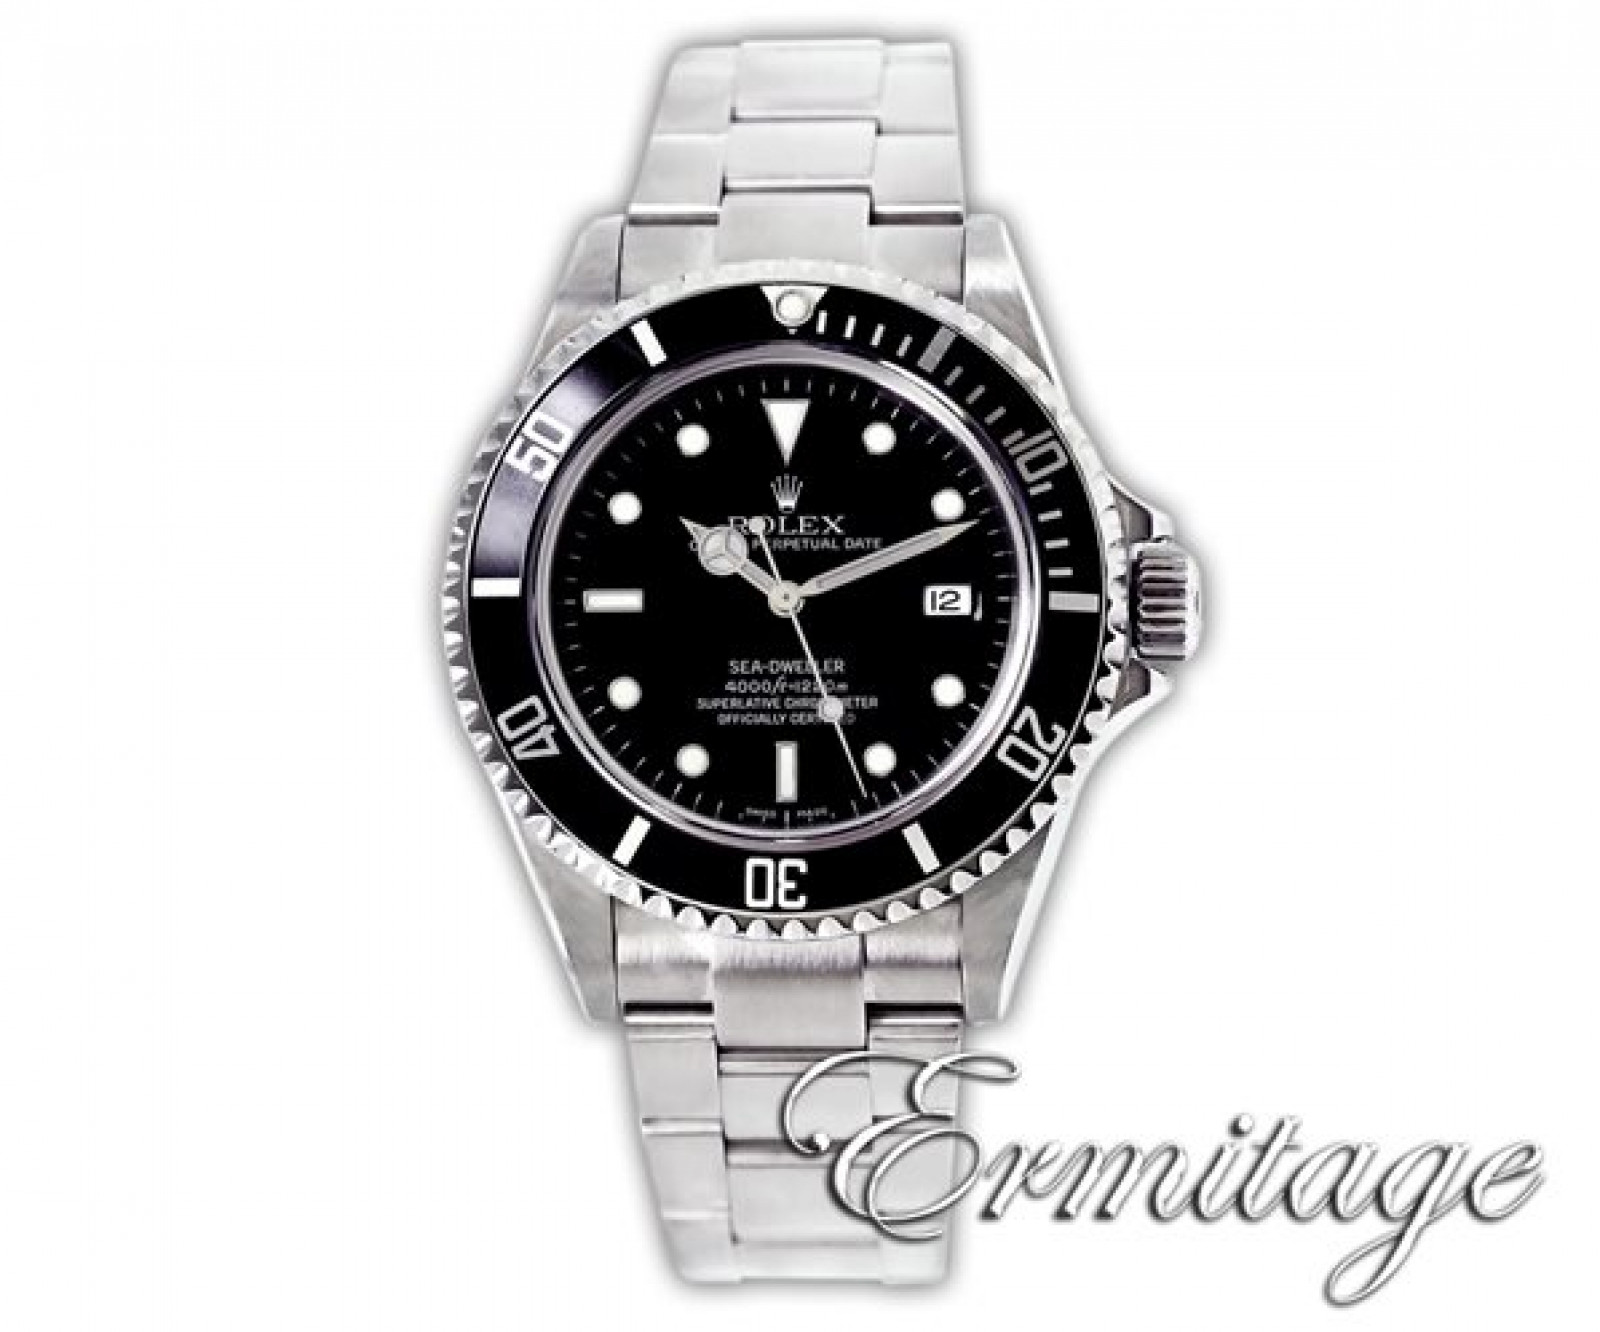 Pre-Owned Rolex Oyster Perpetual Sea-Dweller 16600 Steel Year 2008